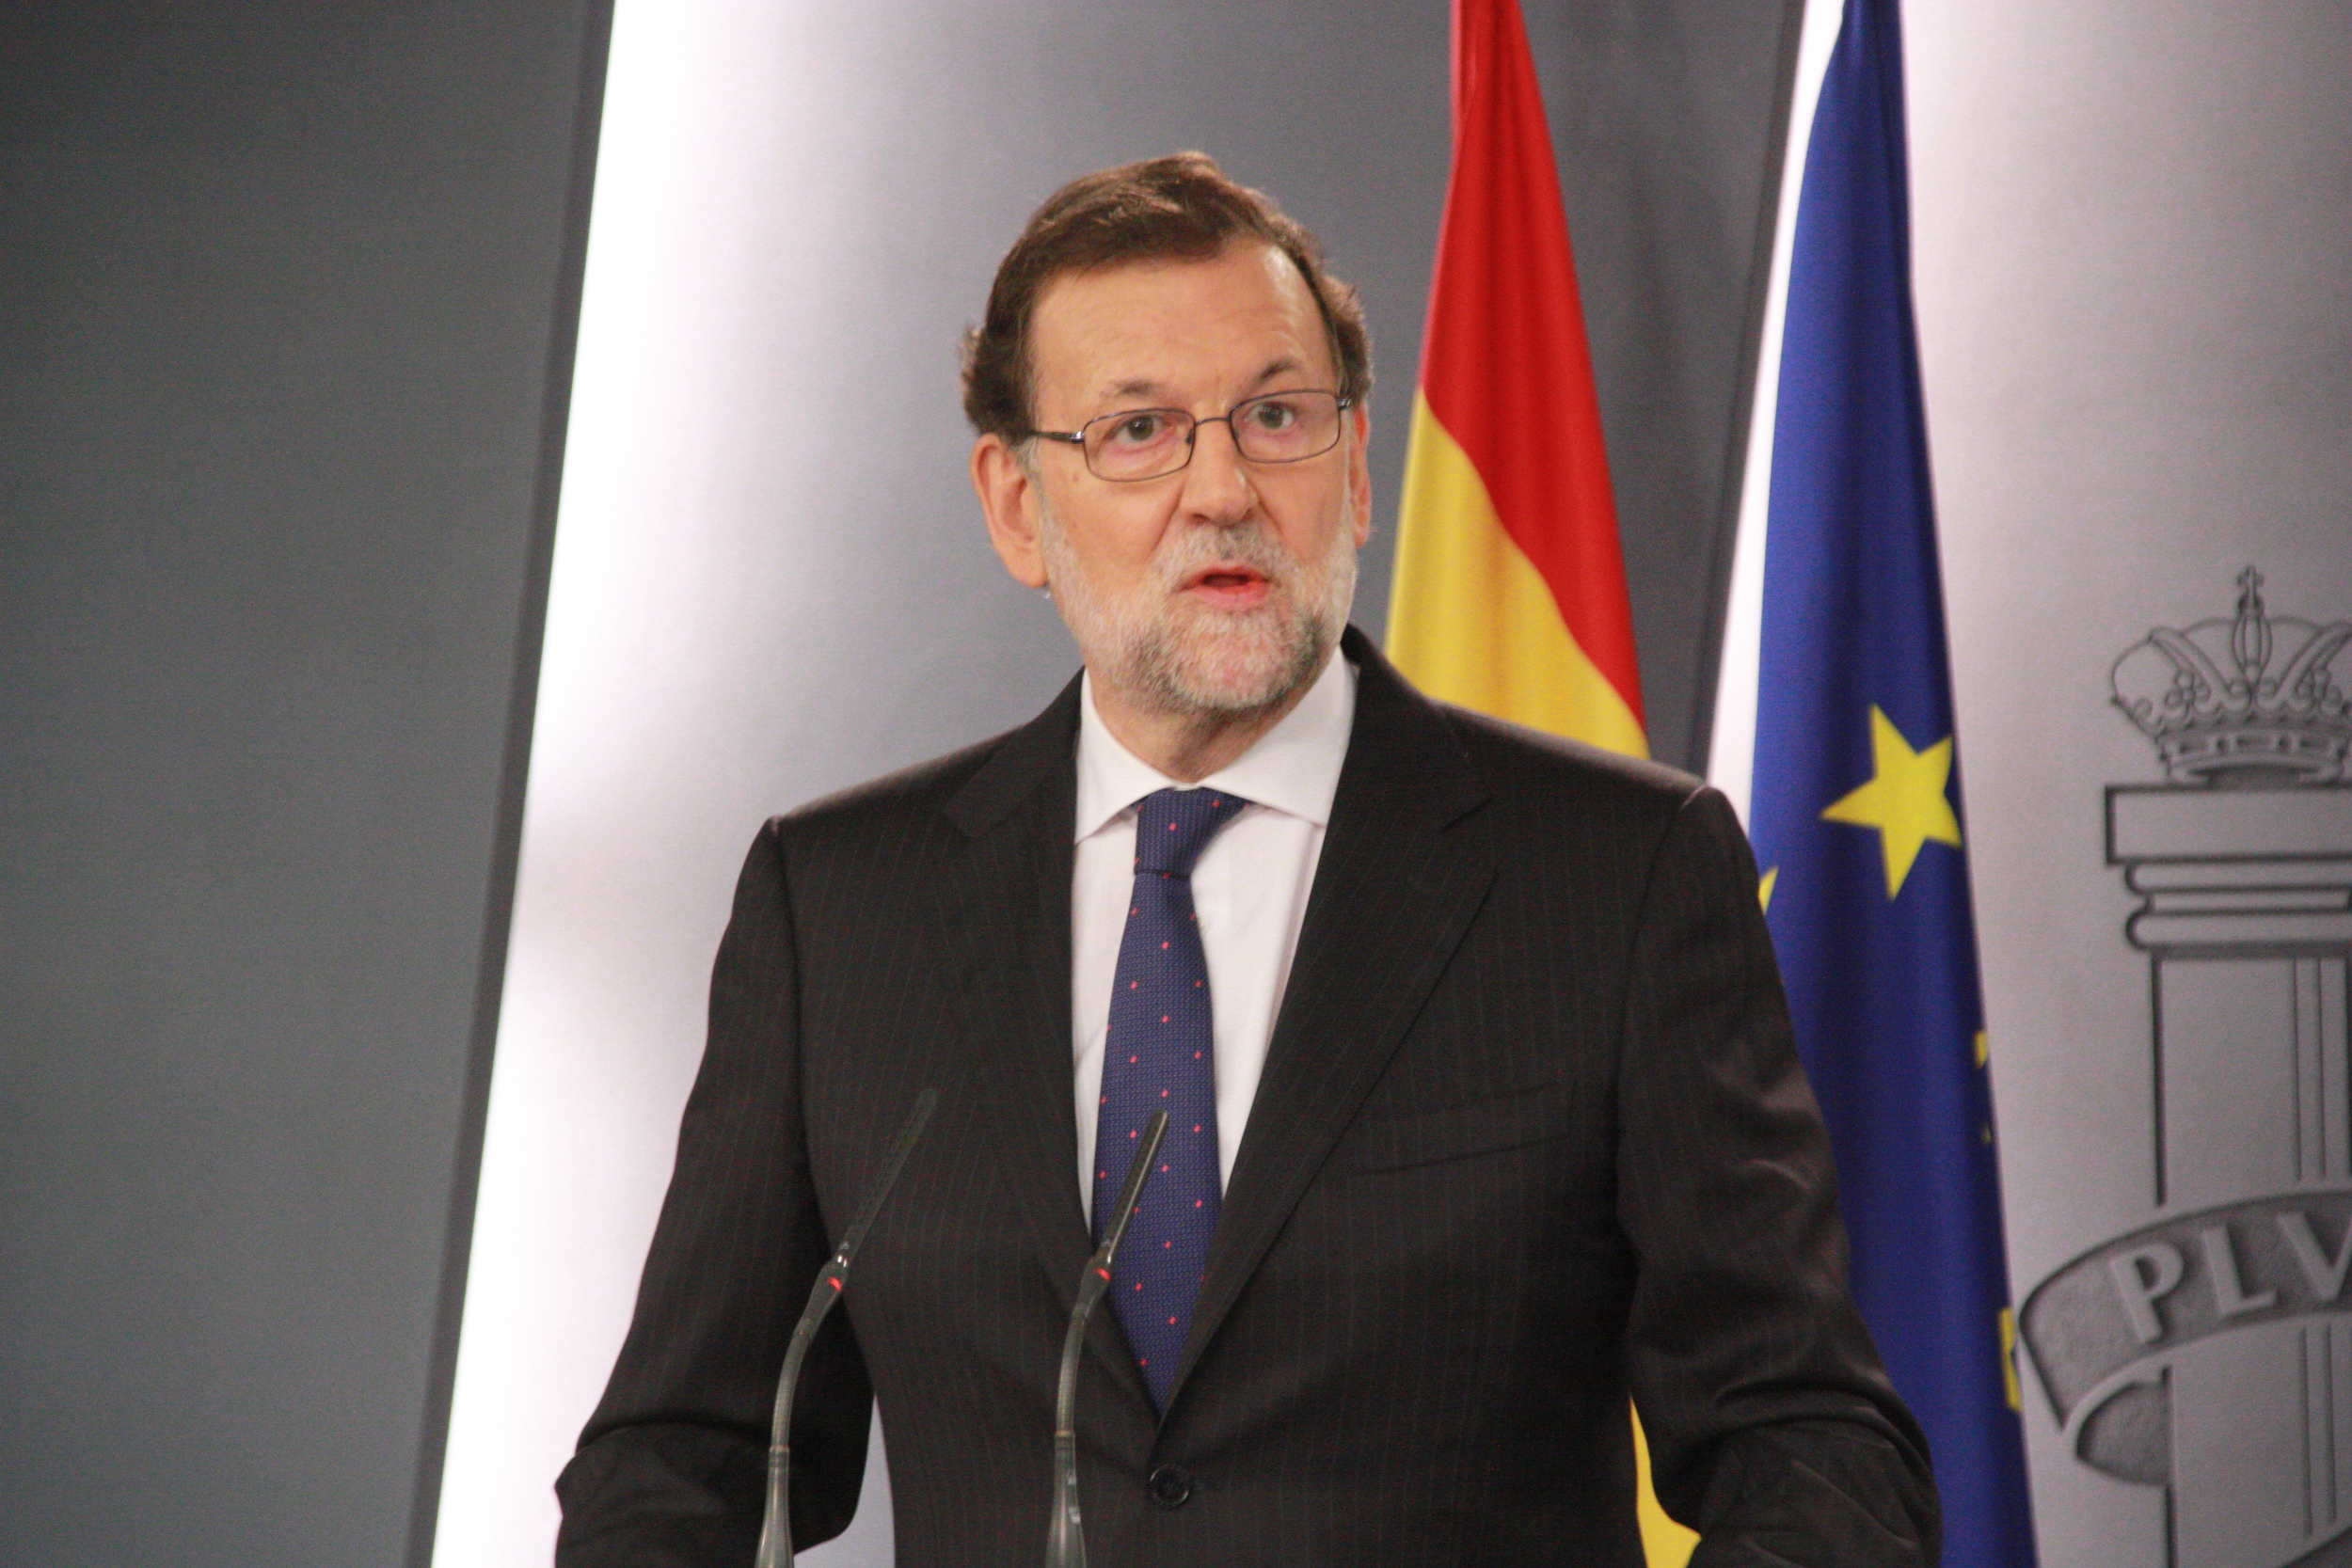 Image of Current Spanish Prime Minister, Mariano Rajoy during an appearance before the media (by ACN)